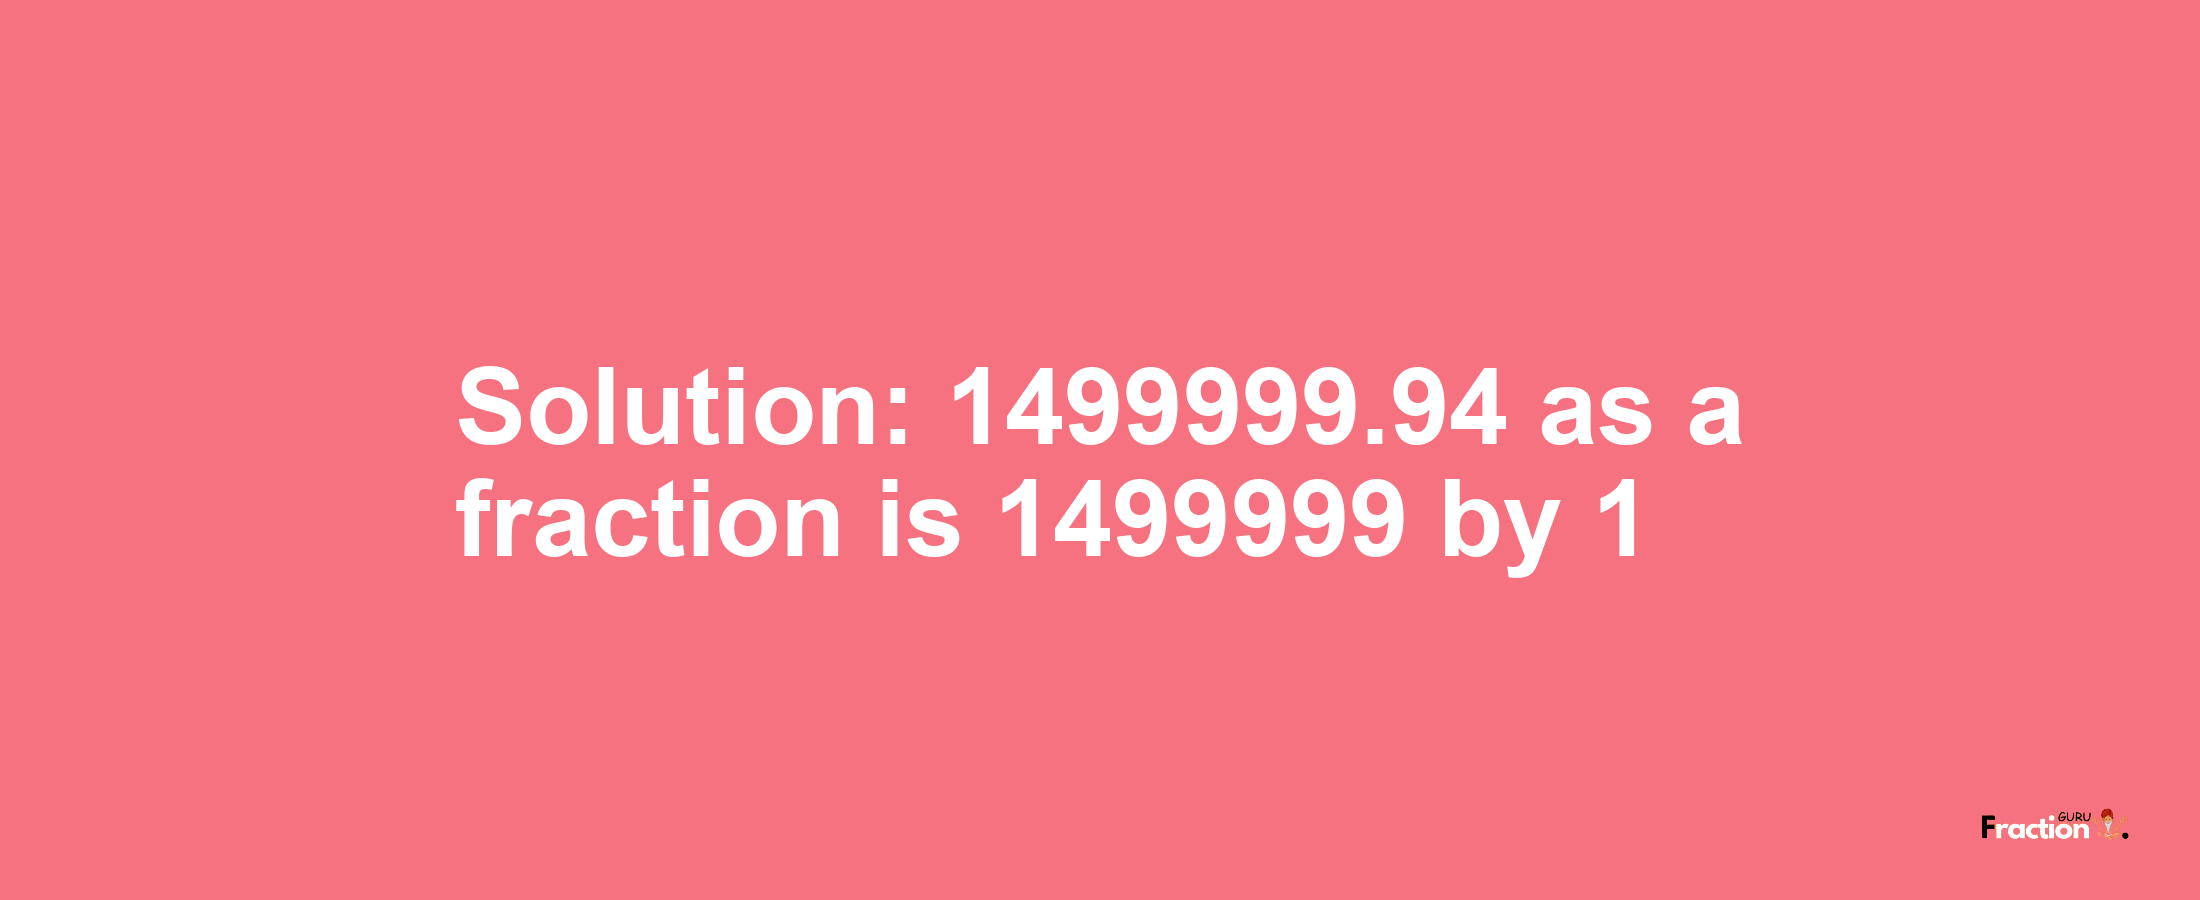 Solution:1499999.94 as a fraction is 1499999/1